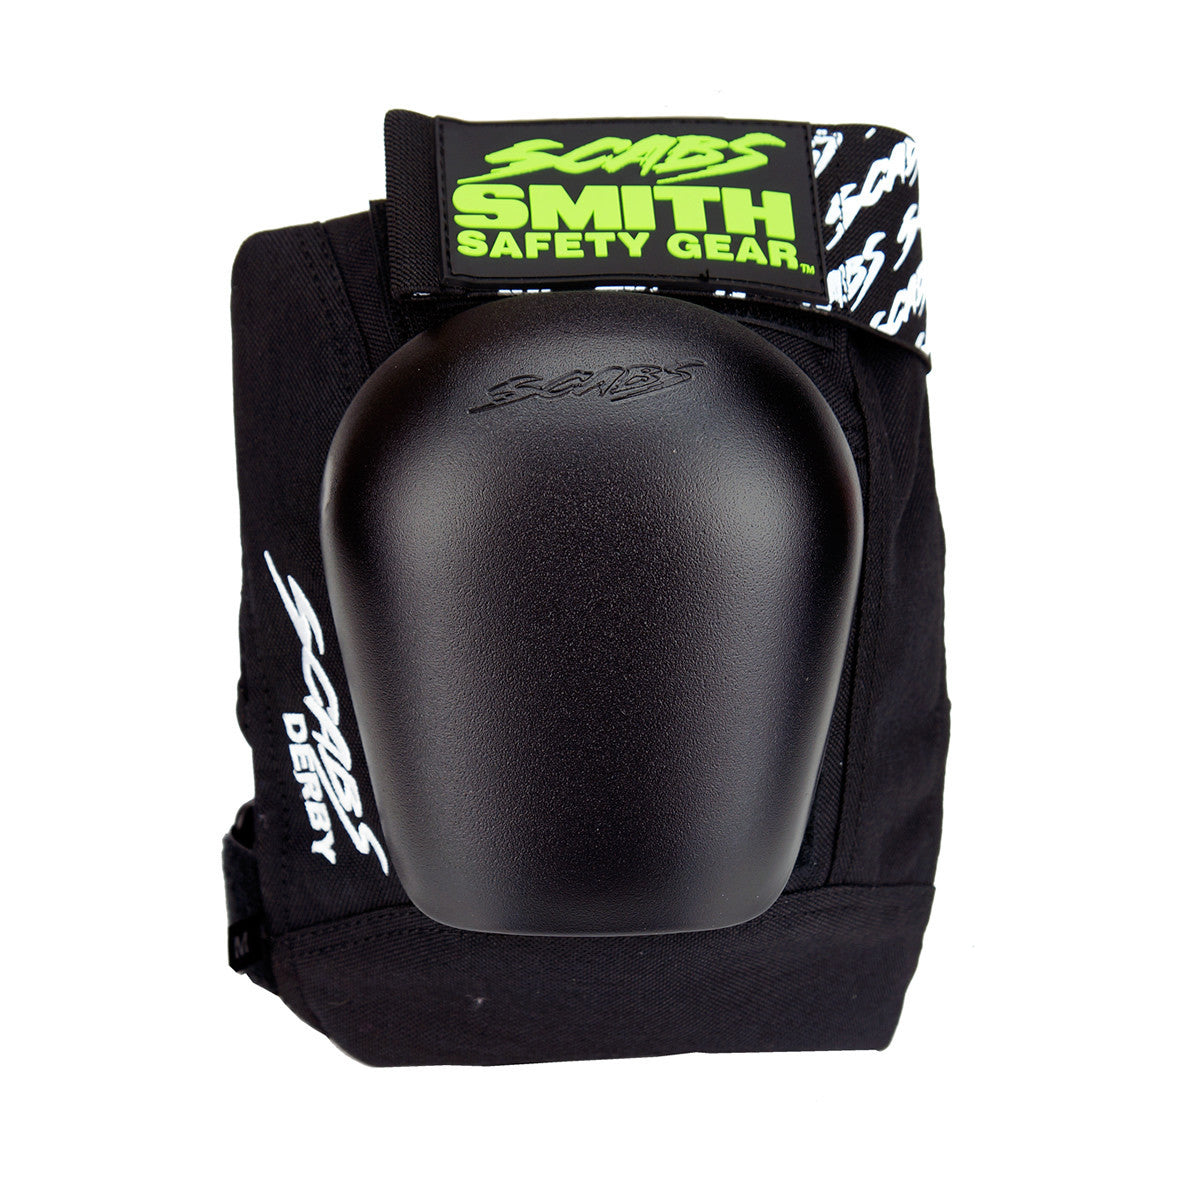 Smith Safety Gear Scabs Derby Knee Pad 